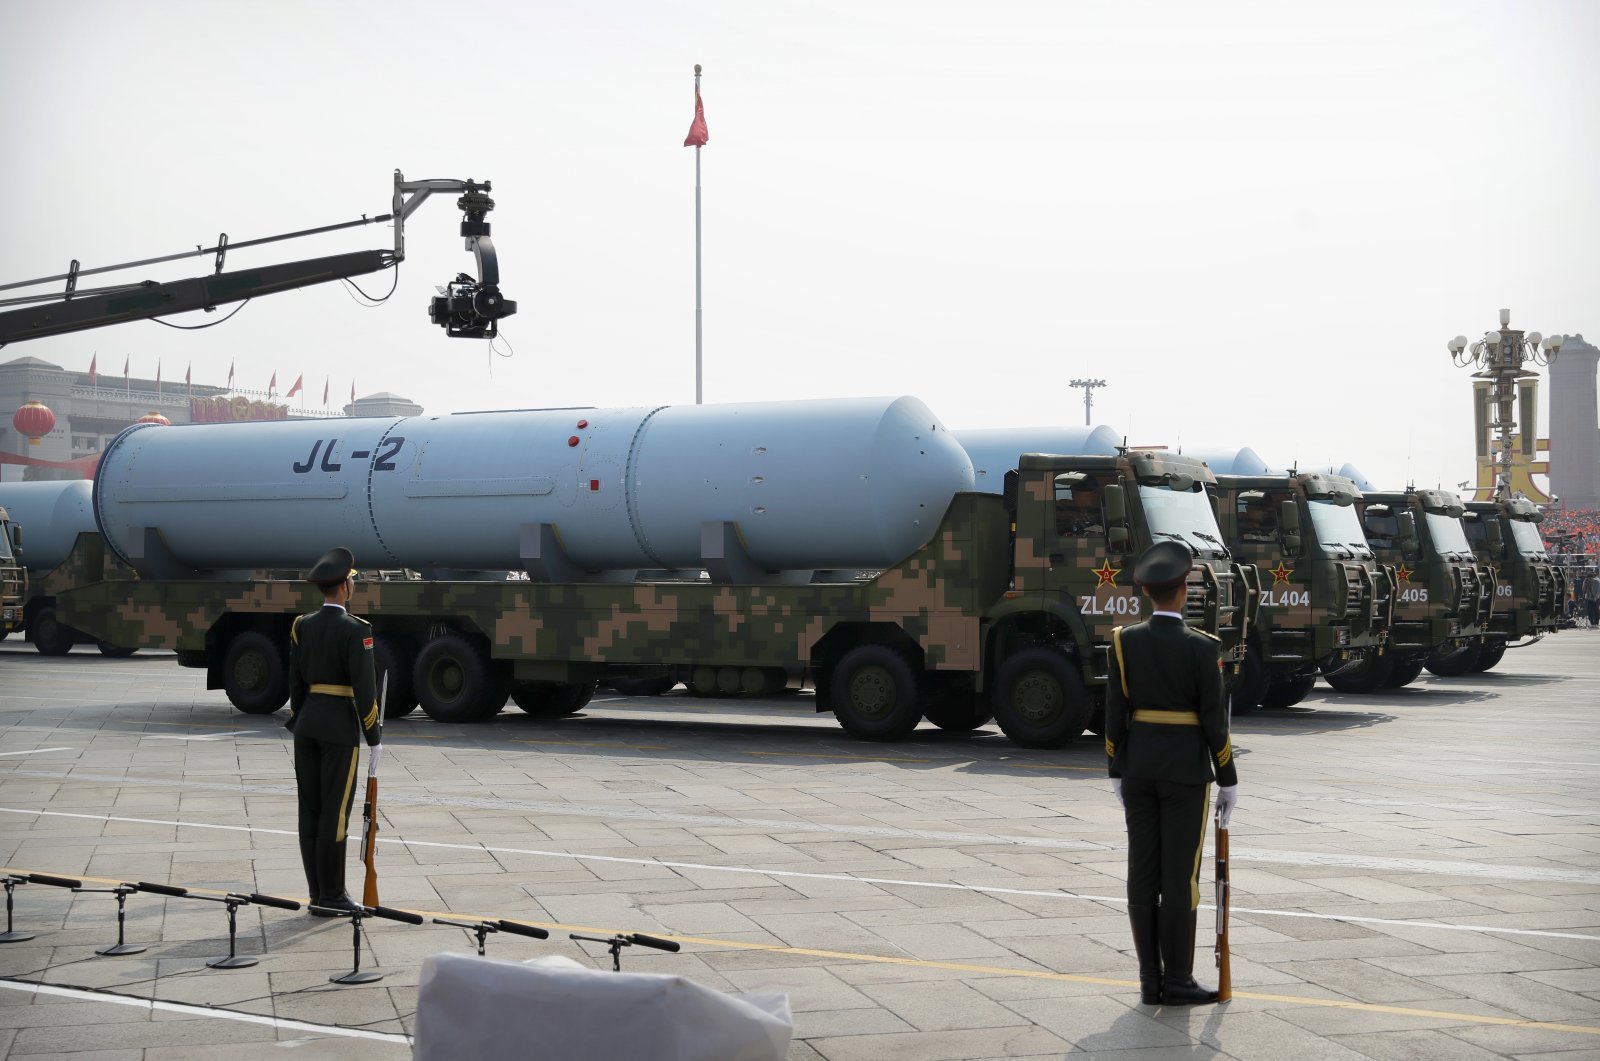 Military vehicles carrying JL-2 submarine-launched missiles roll during a parade, Beijing, China, Oct. 1, 2019. (AP Photo)